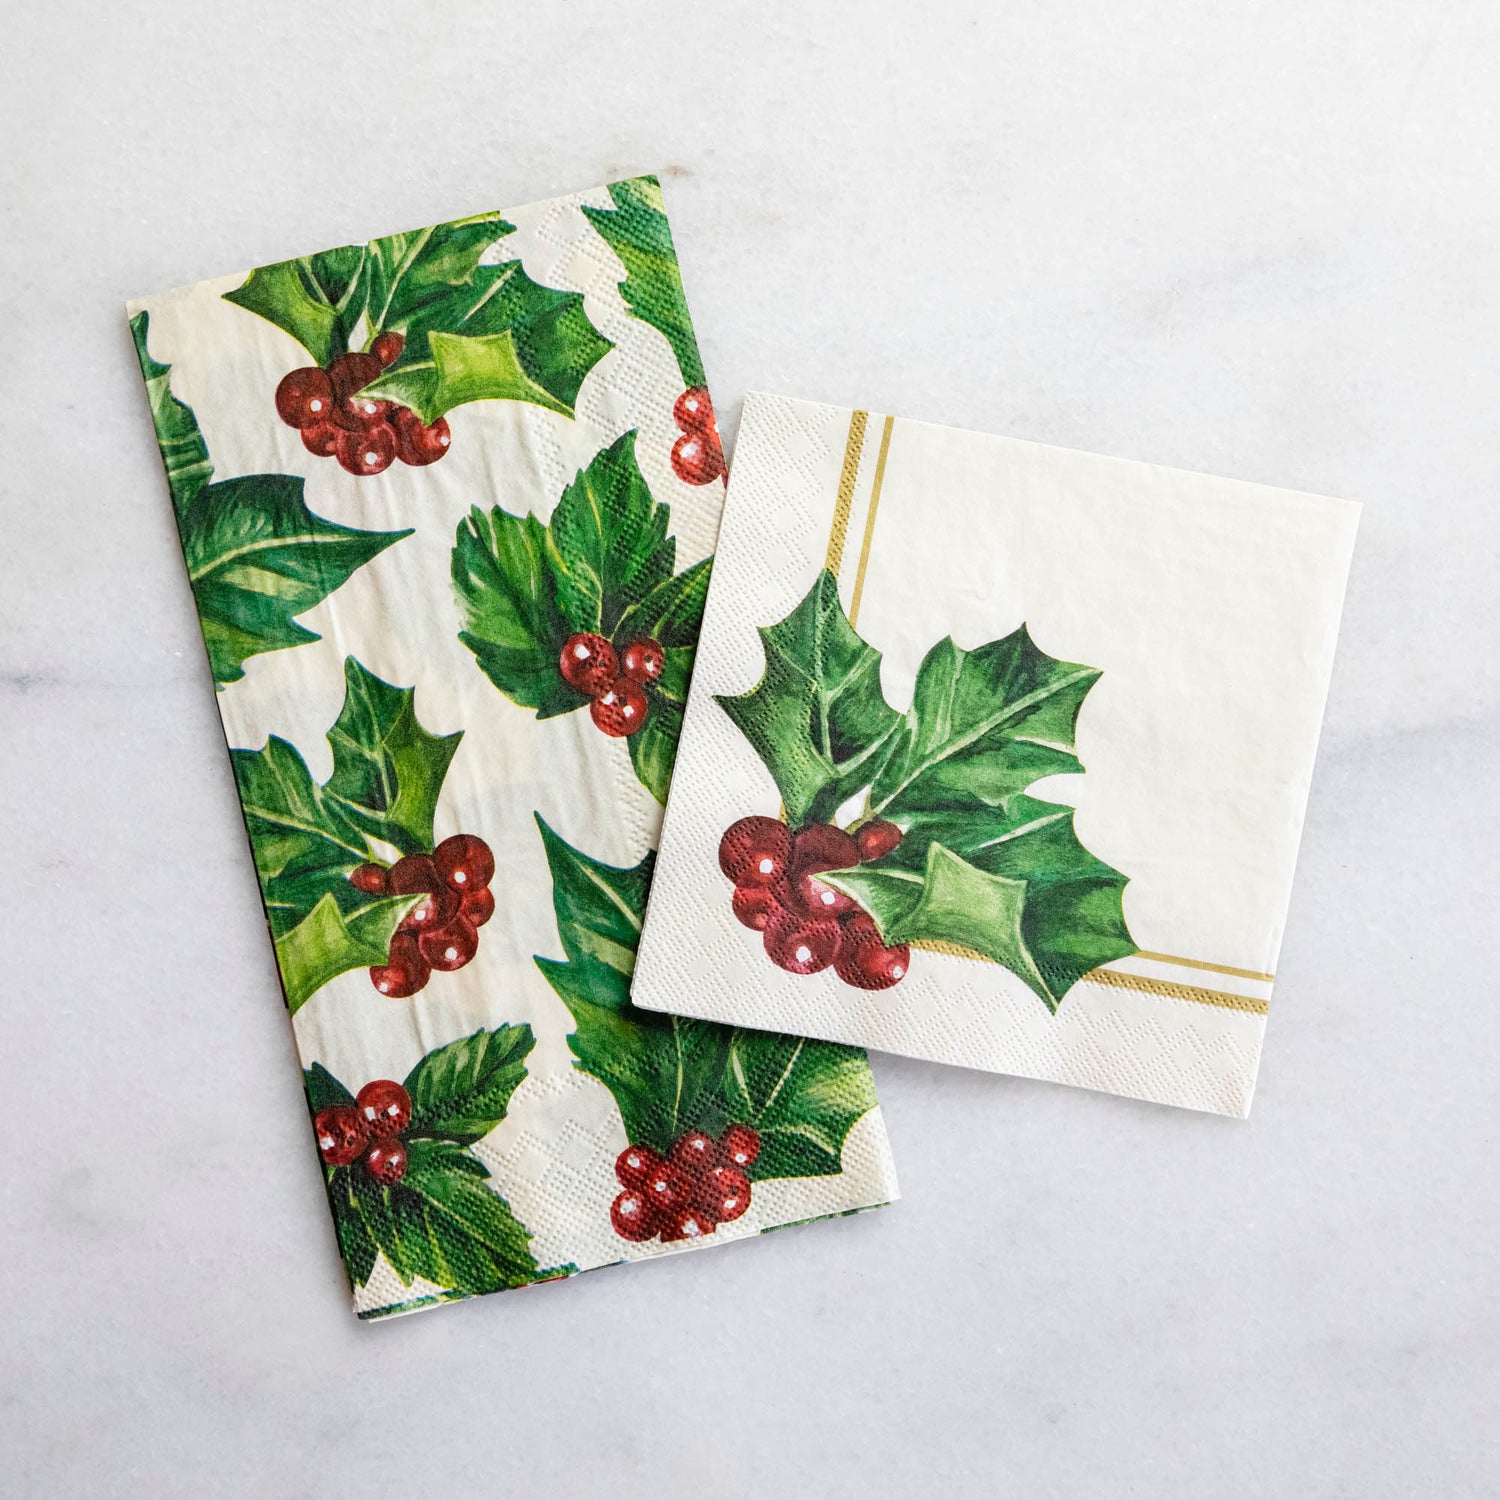 A square cocktail napkin featuring painterly green holly leaves and red berries in the lower right, with decorative gold frame lines along the lower and right edges, on a white background.